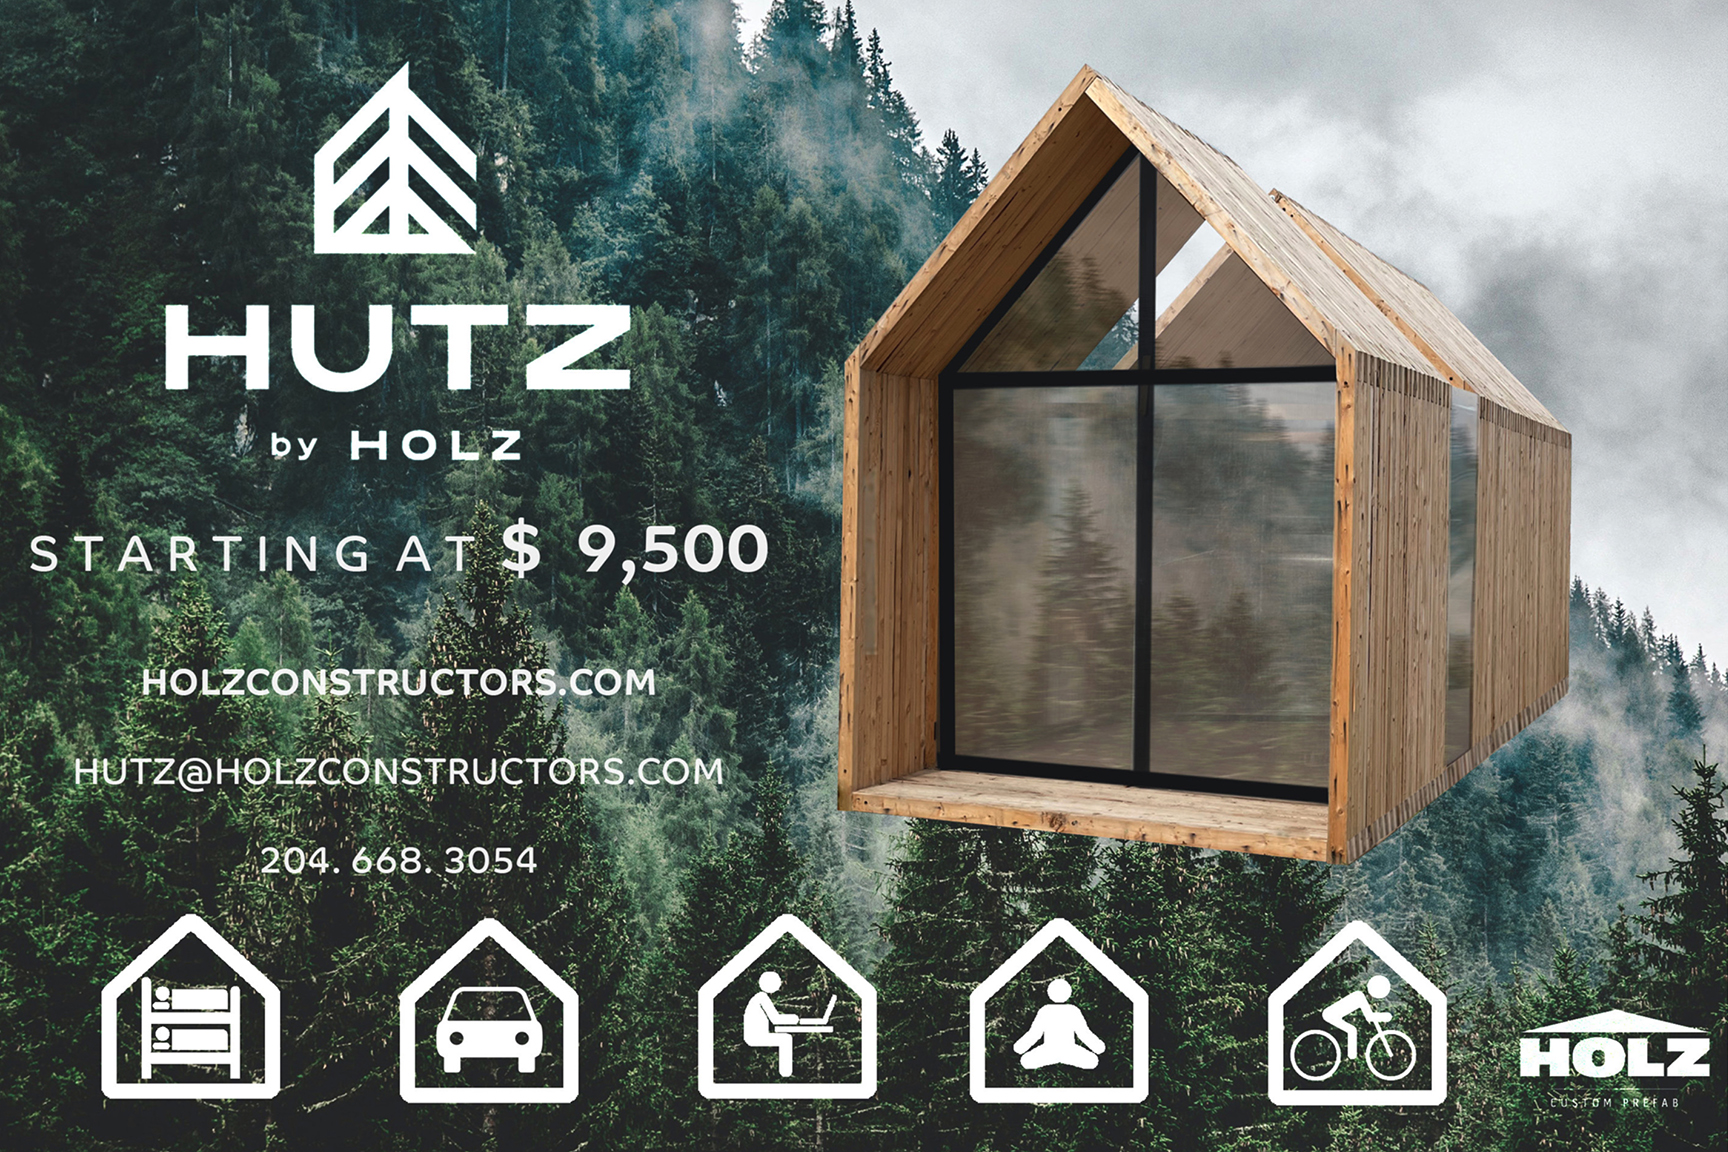 Graphics designed by Brooke for the 'Holz Hutz'.